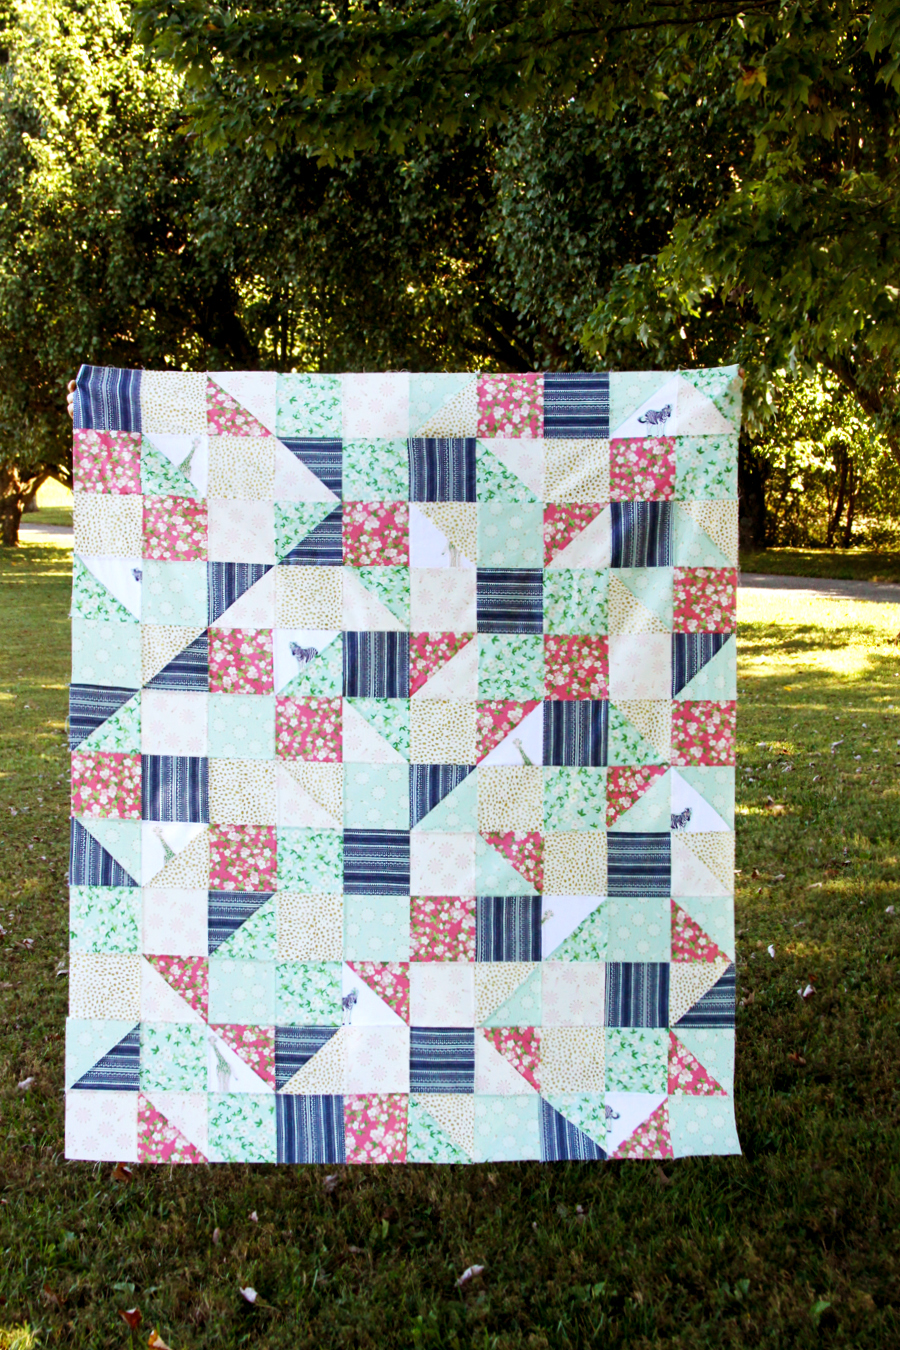 "Hidden Safari Party" is a Free Lap Quilt Pattern designed by Bev McCullough from Flamingo Toes!